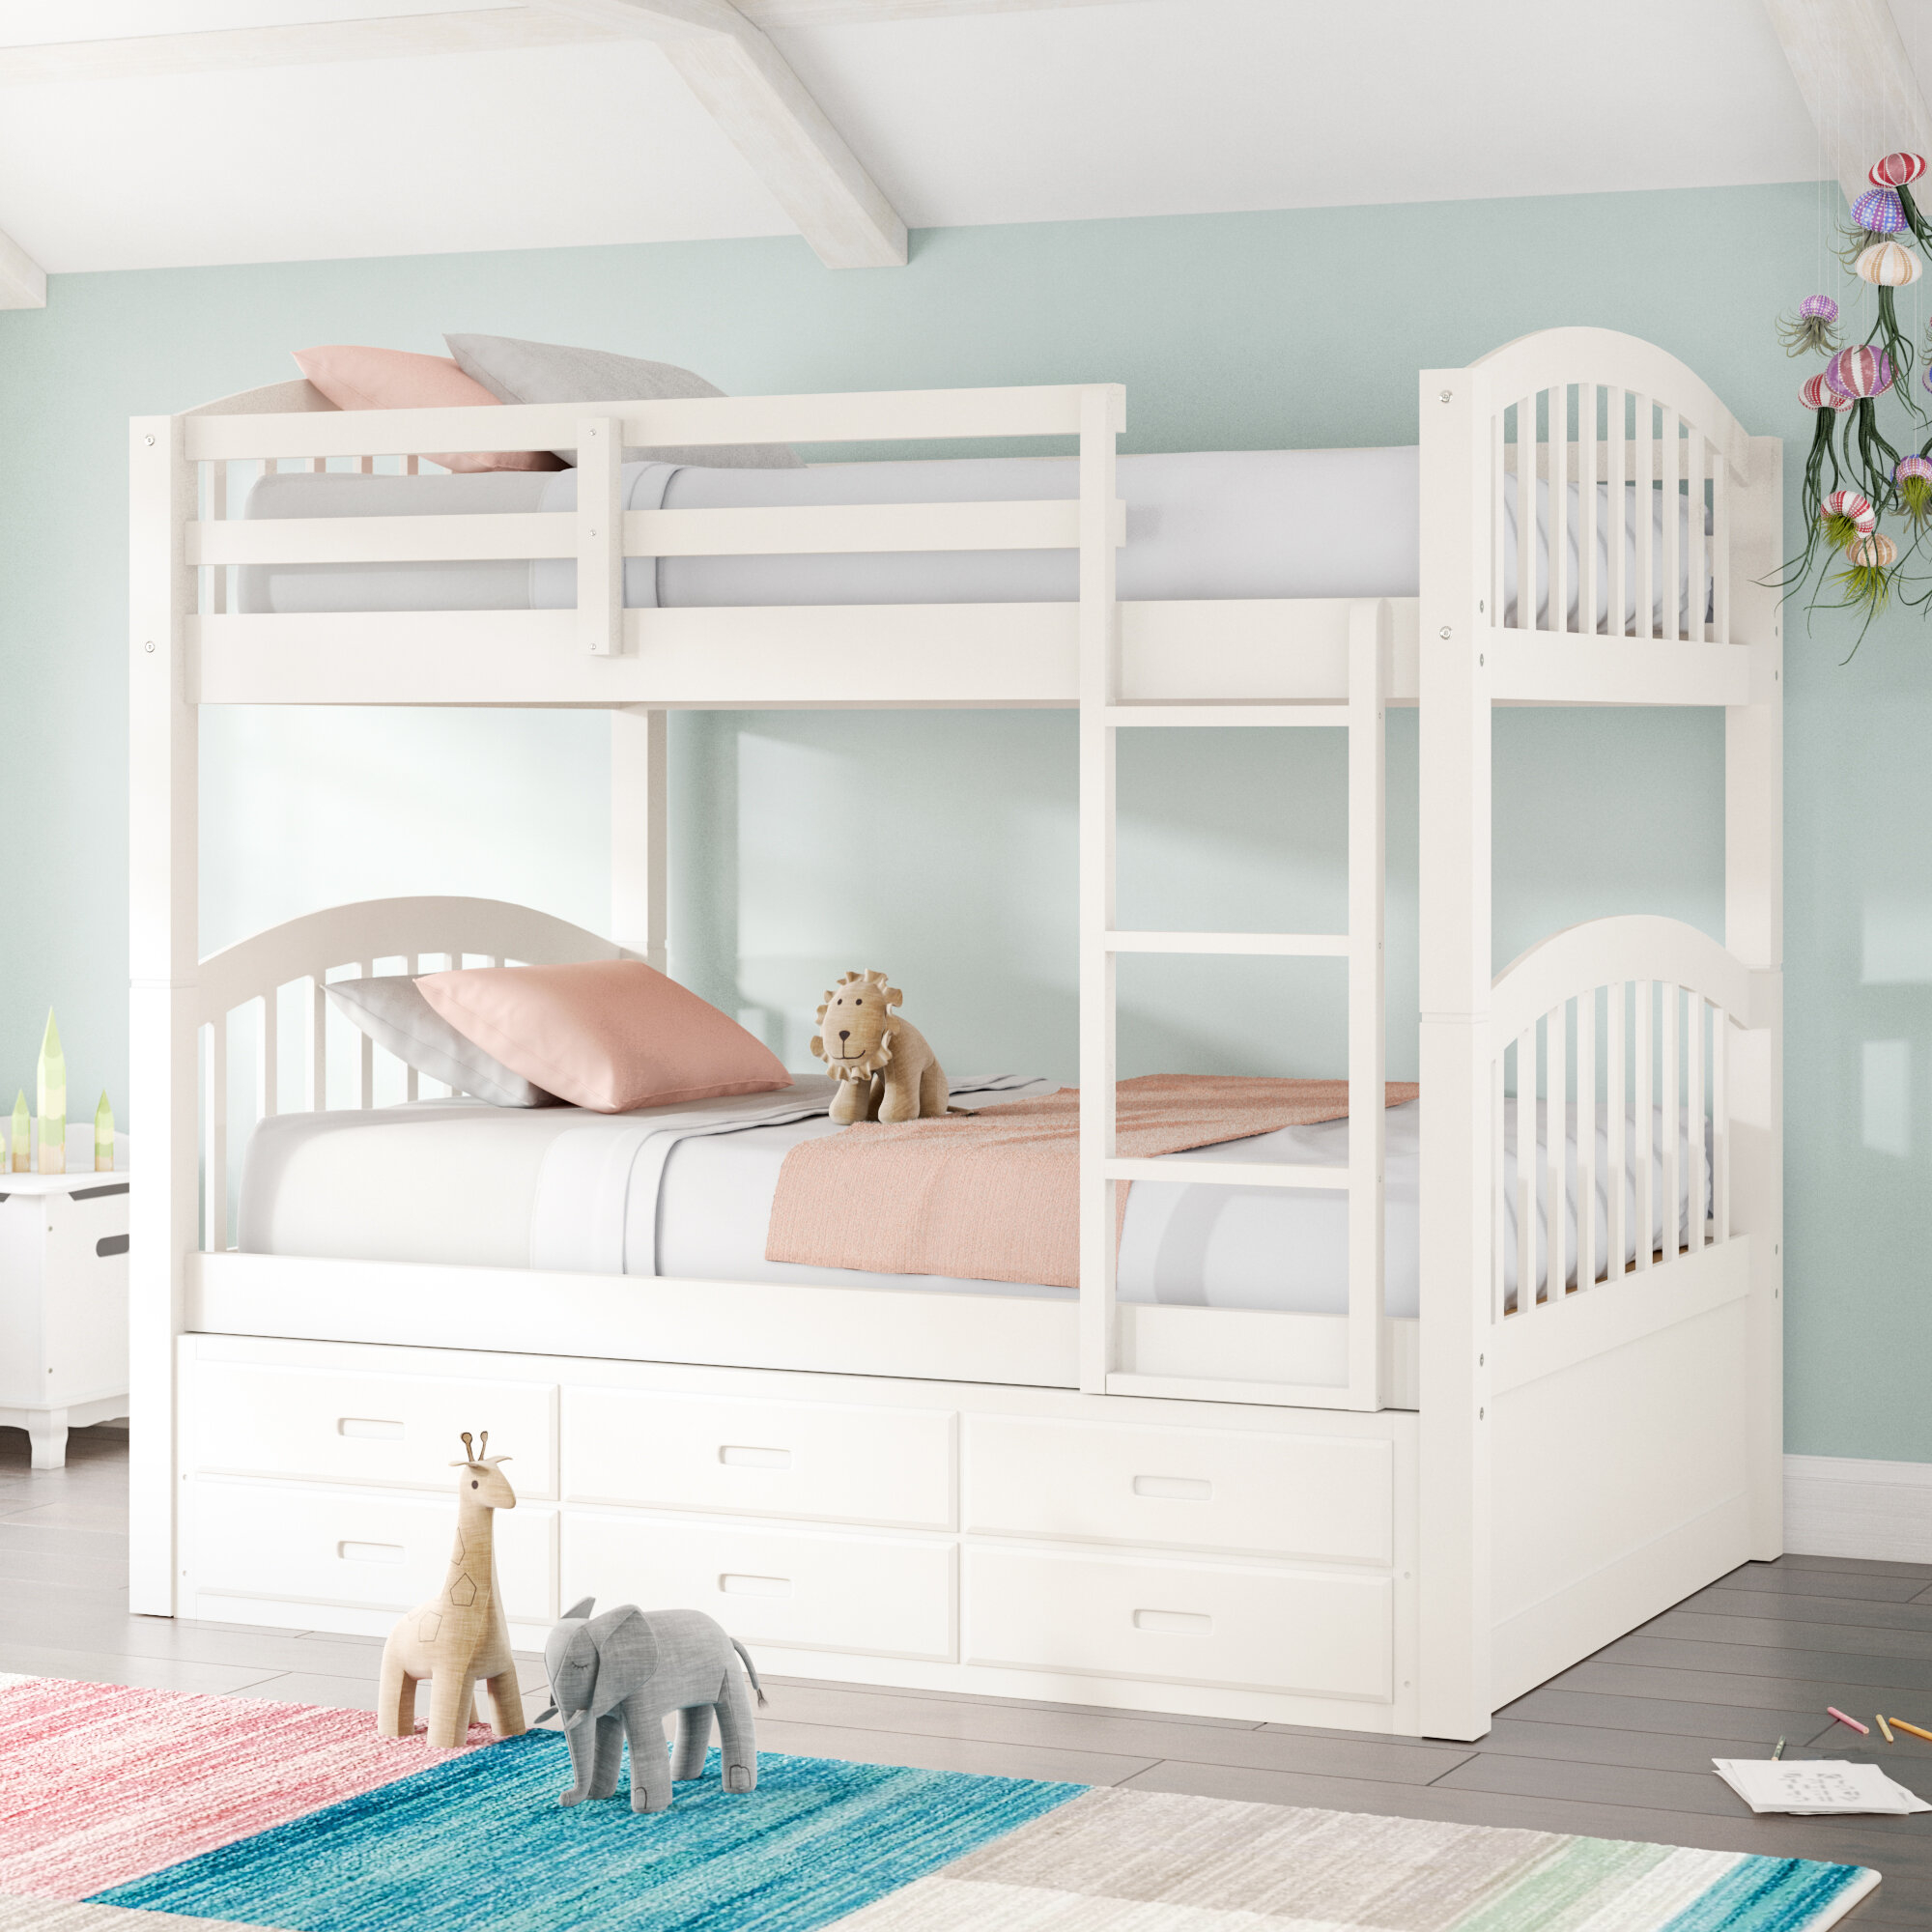 Bunk Beds With Dressers Visualhunt, Crib Bunk Bed Combo